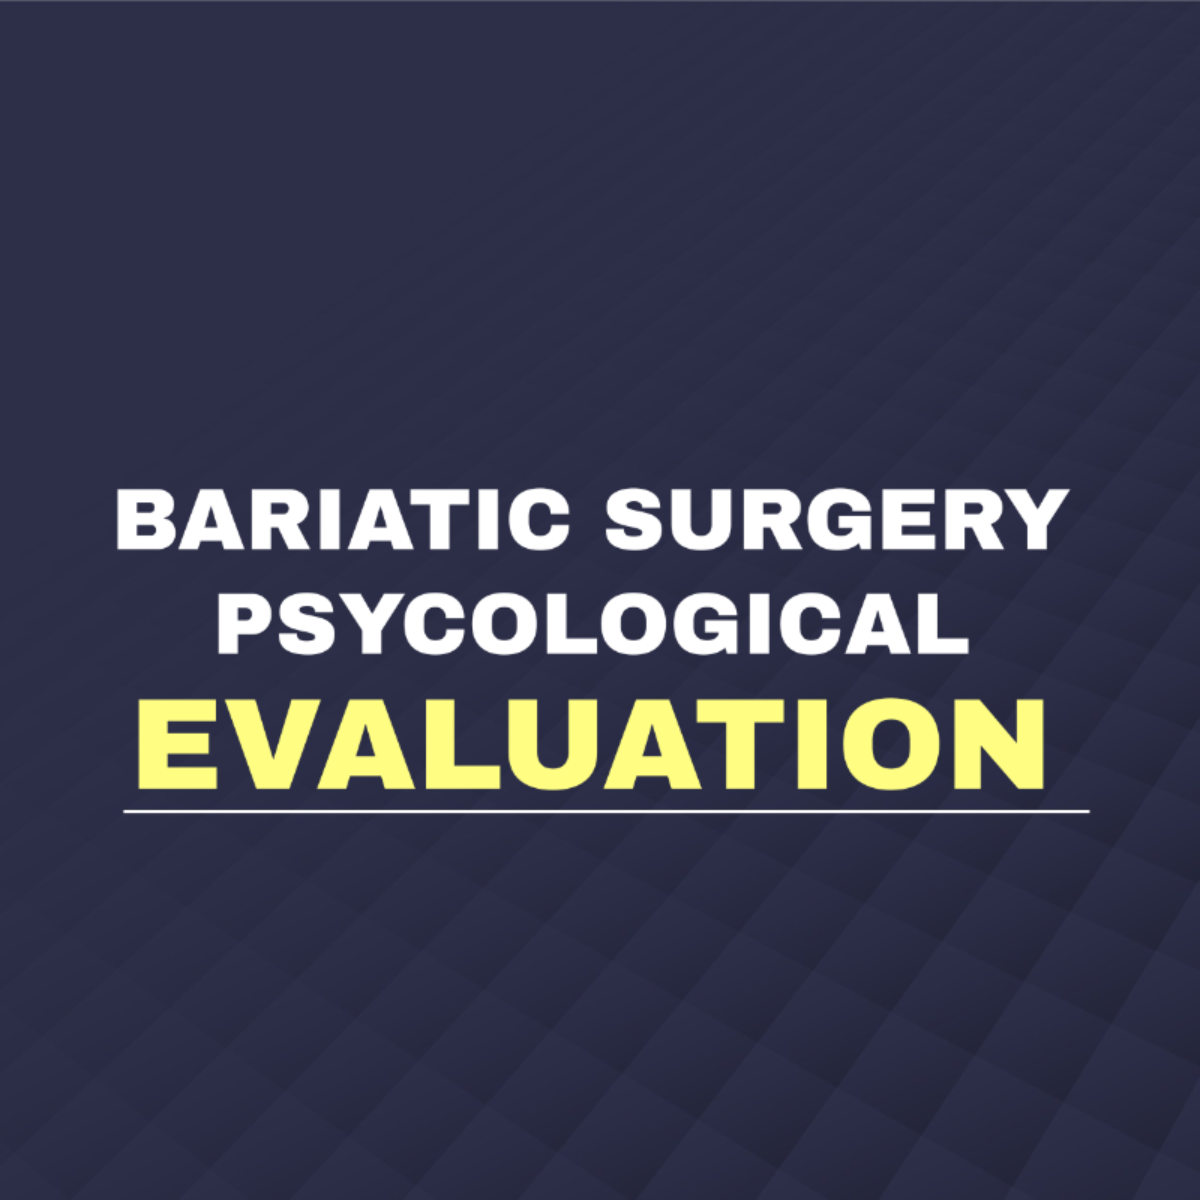 Bariatric Surgery Psychological Evaluation Template